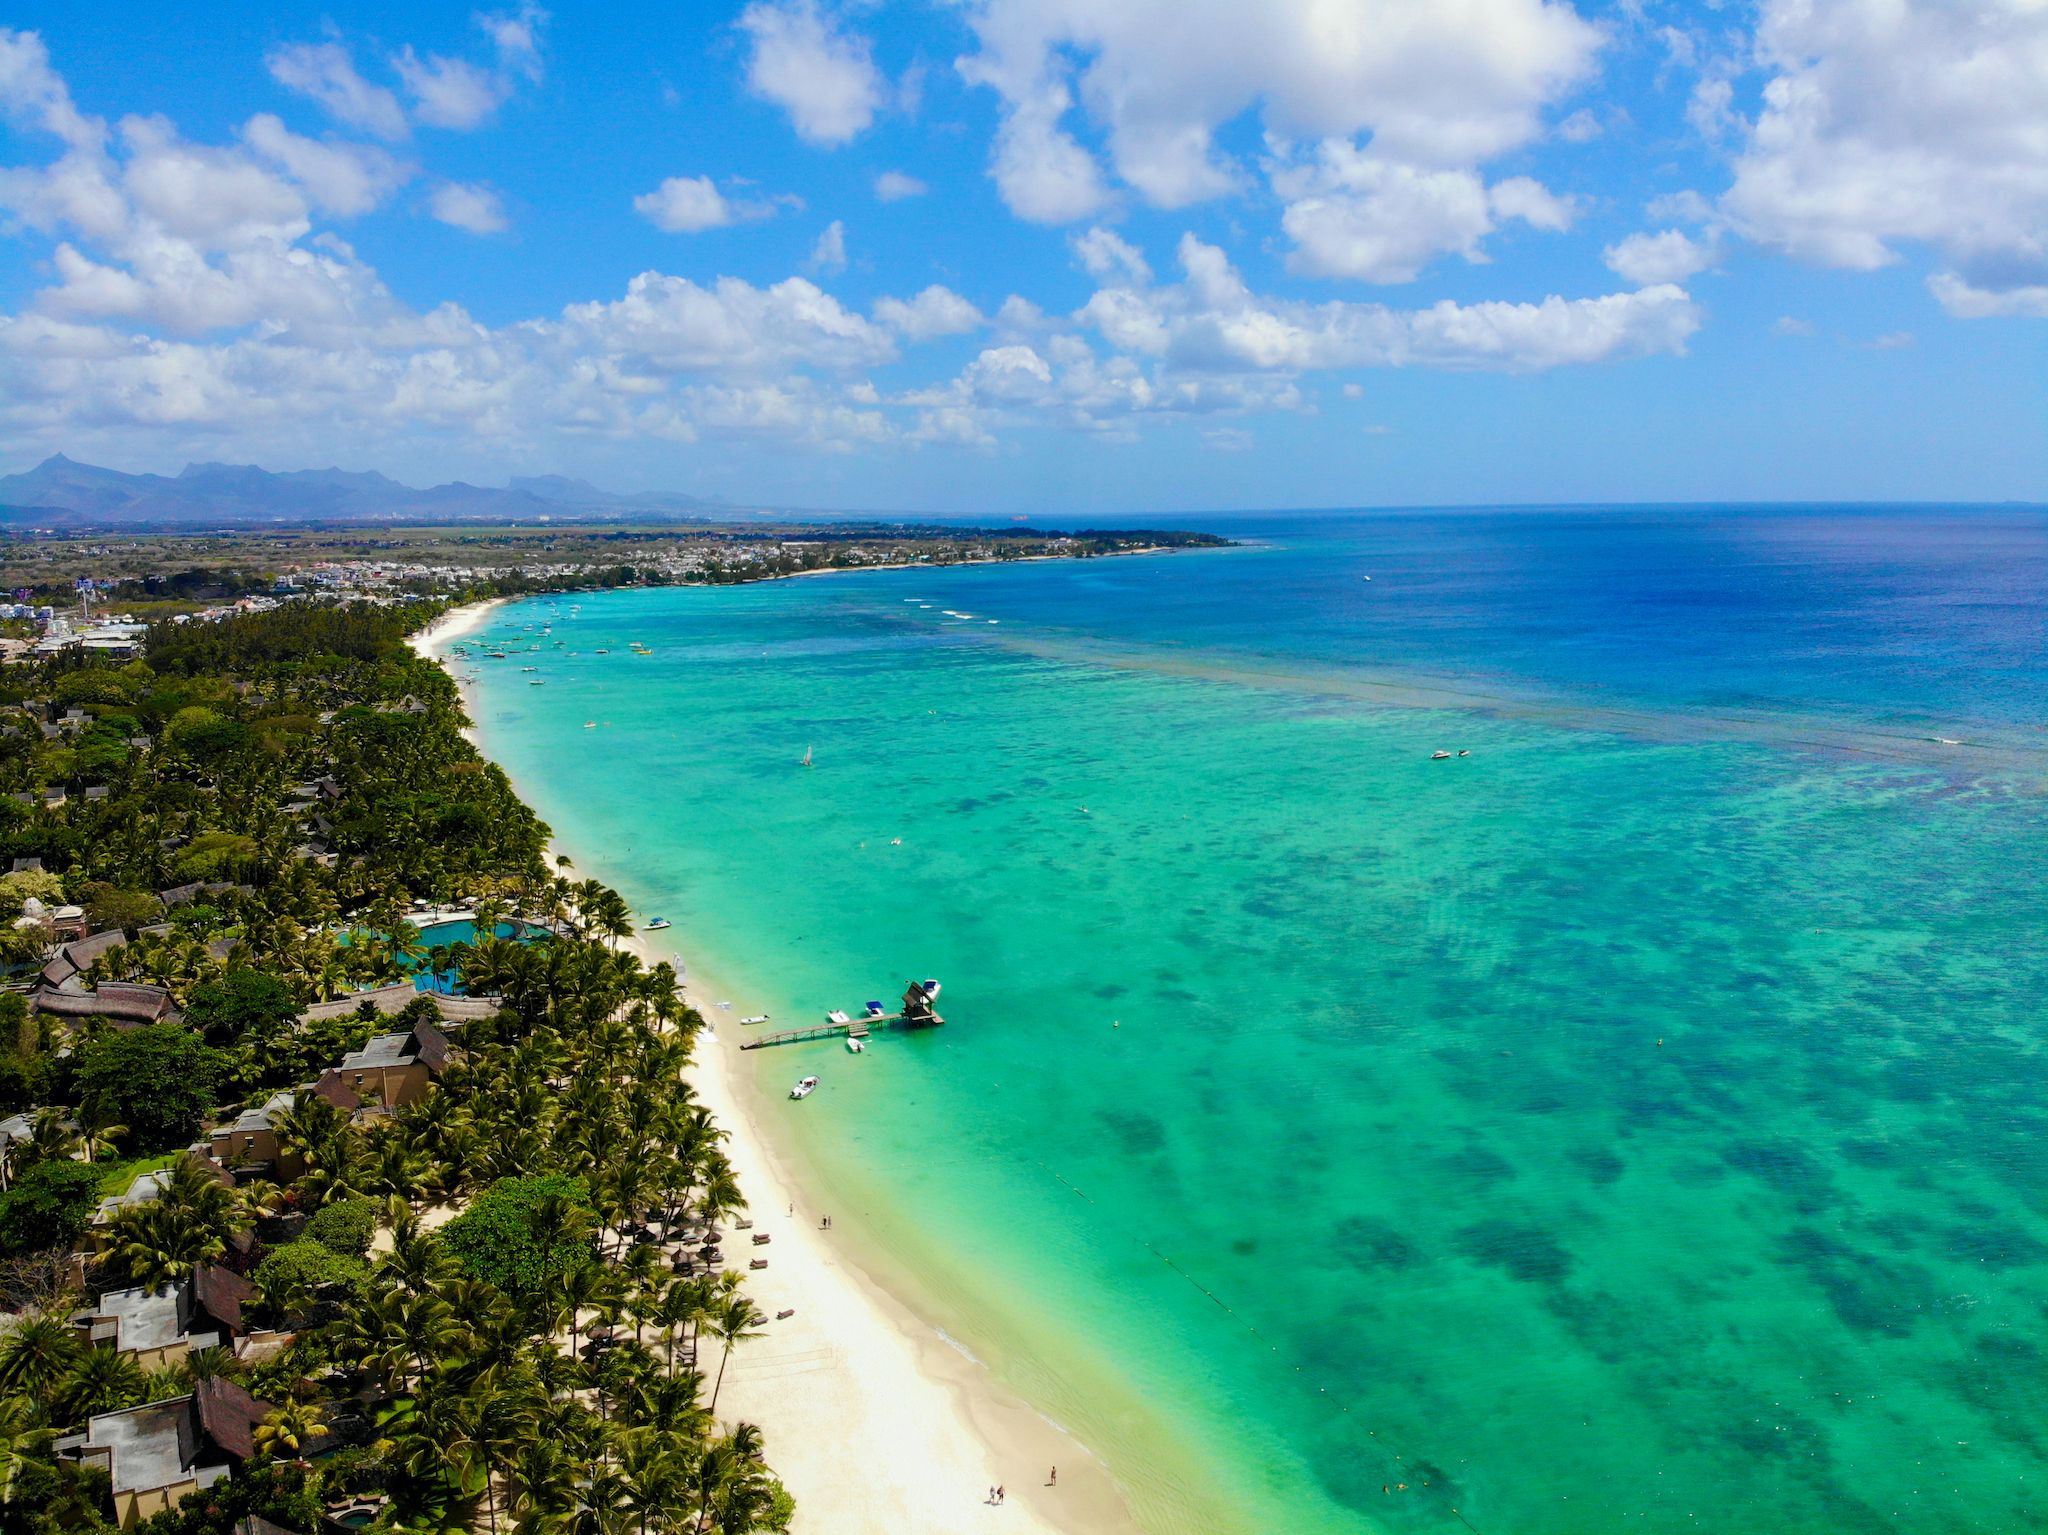 Travel report from Mauritius: We give you many valuable tips on sights and leisure activities for the paradise island in the Indian Ocean. Photo: Sascha Tegtmeyer The most beautiful Mauritius beaches – tips & recommendations